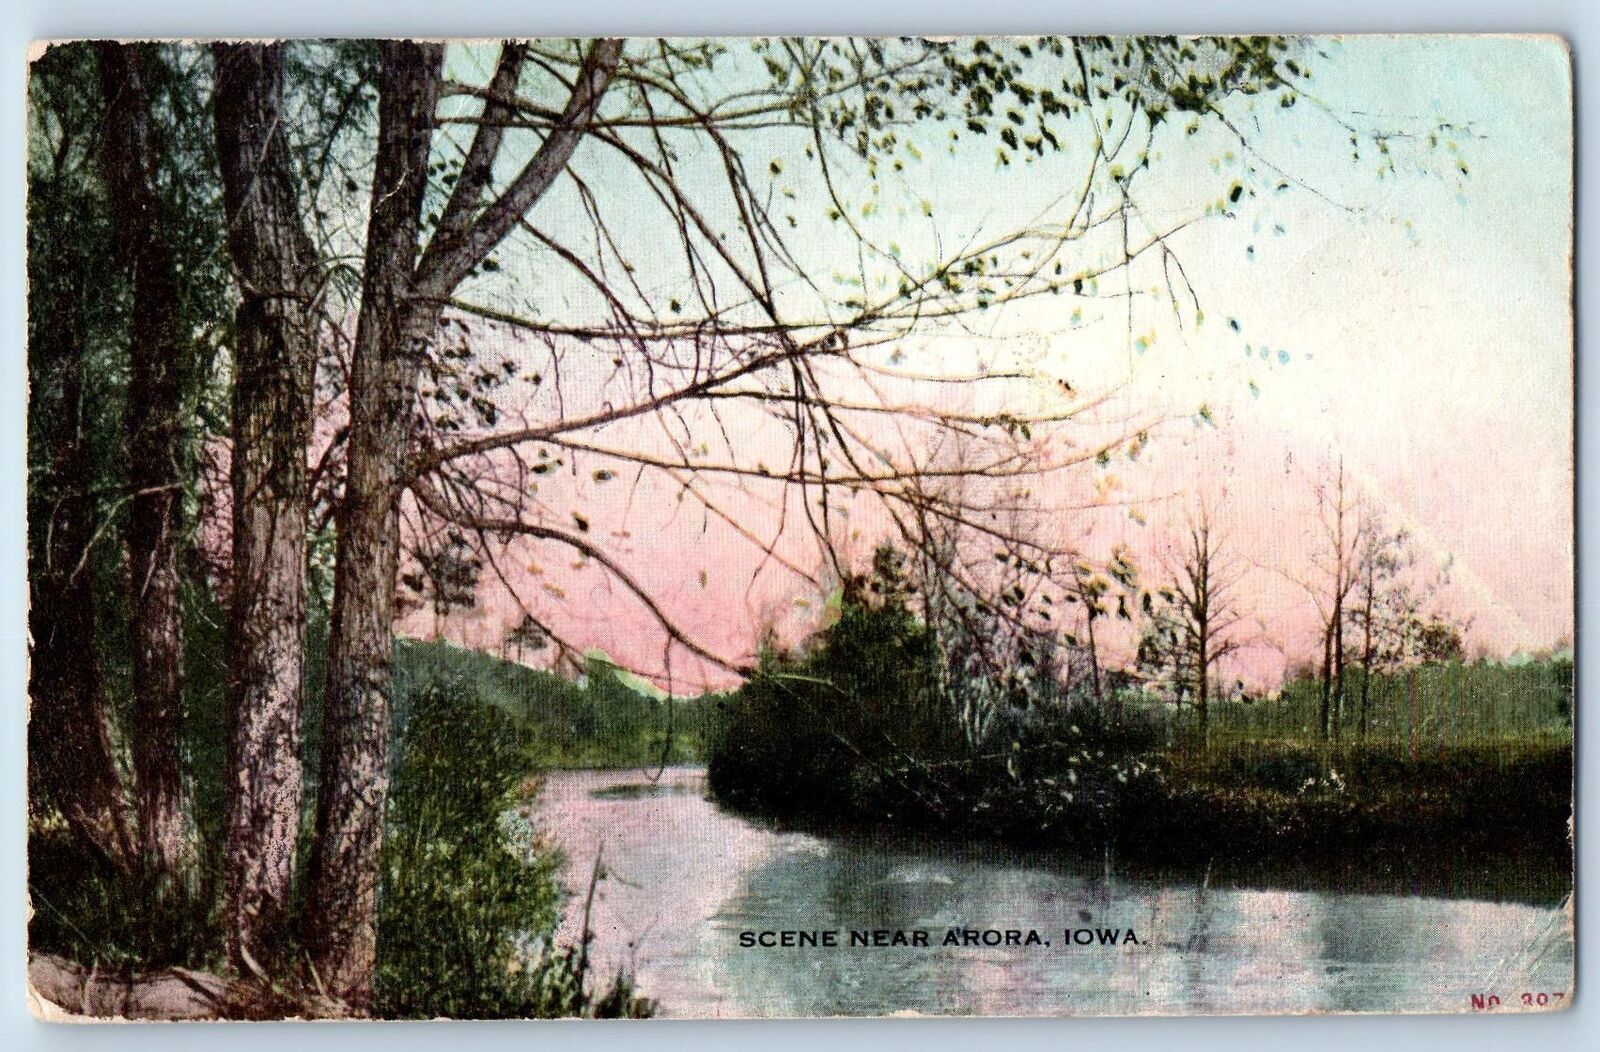 Arora Iowa IA Postcard Scenic View Of River And Trees Leaves Grass 1911 Antique